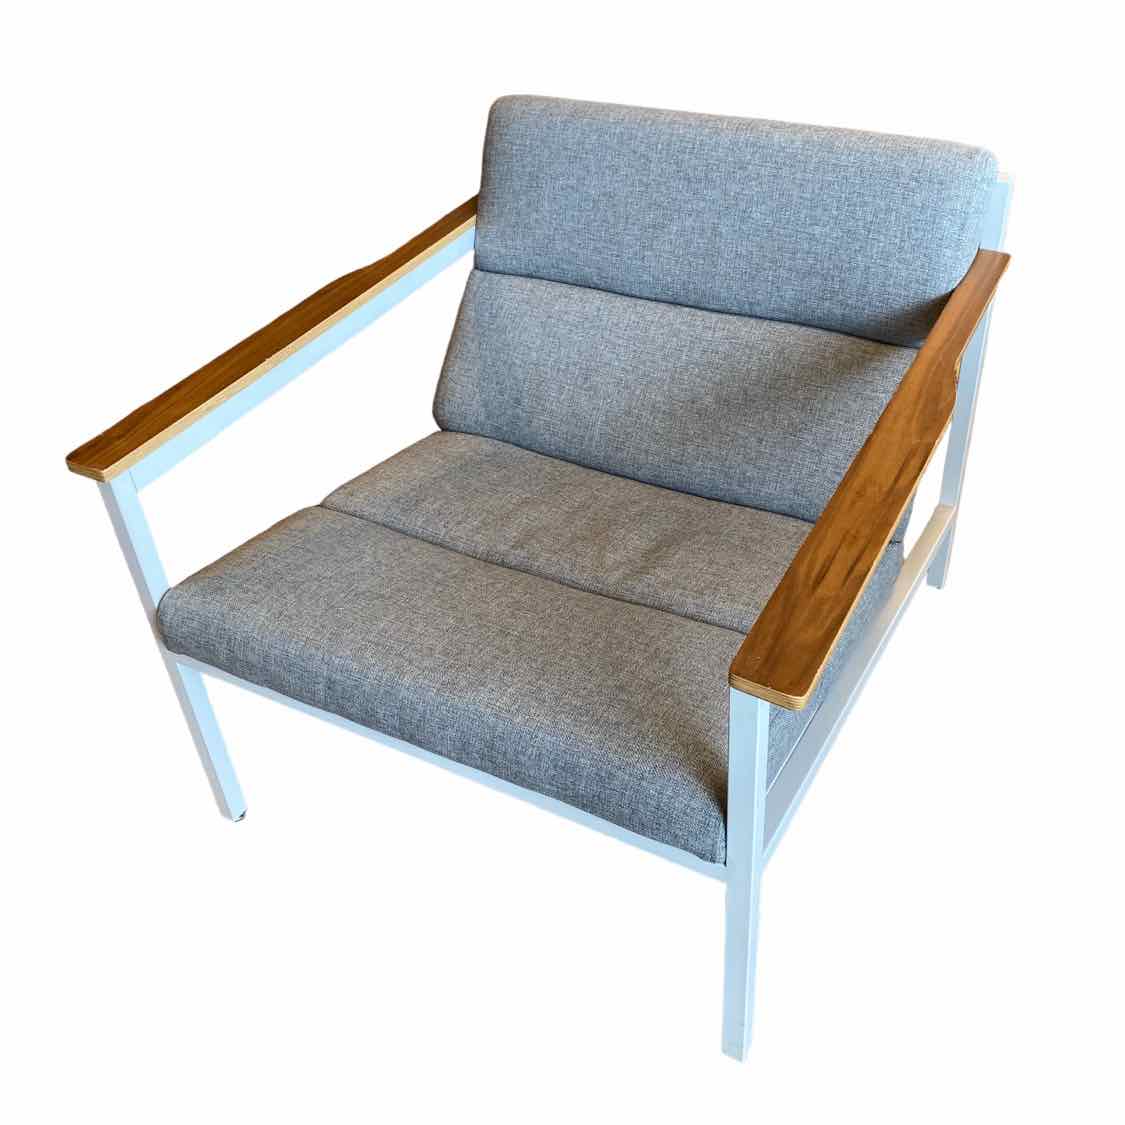 Halifax Chair by Gus Modern in White/Grey - colletteconsignment.com